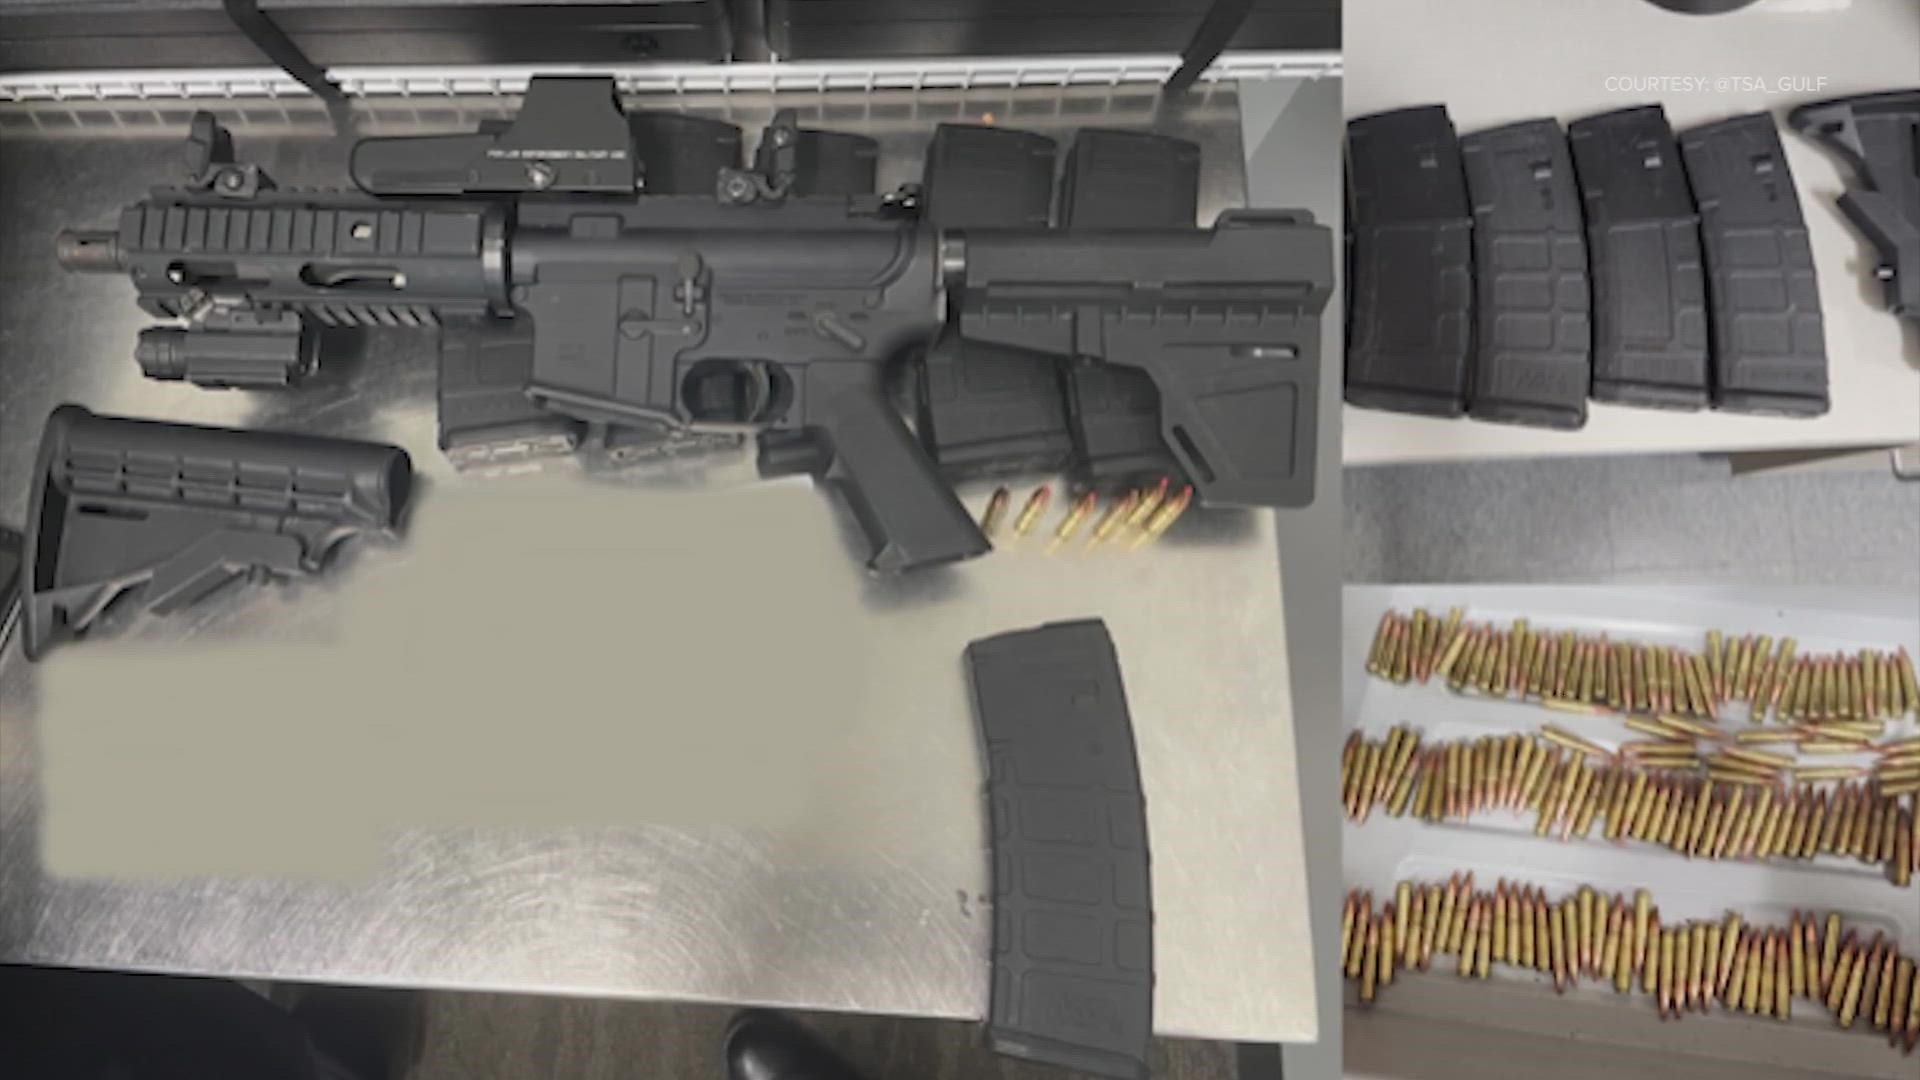 A 52-year-old Louisiana man, who also had 163 rounds of ammunition in five magazines, now faces a fine that could be as high as $15,000.